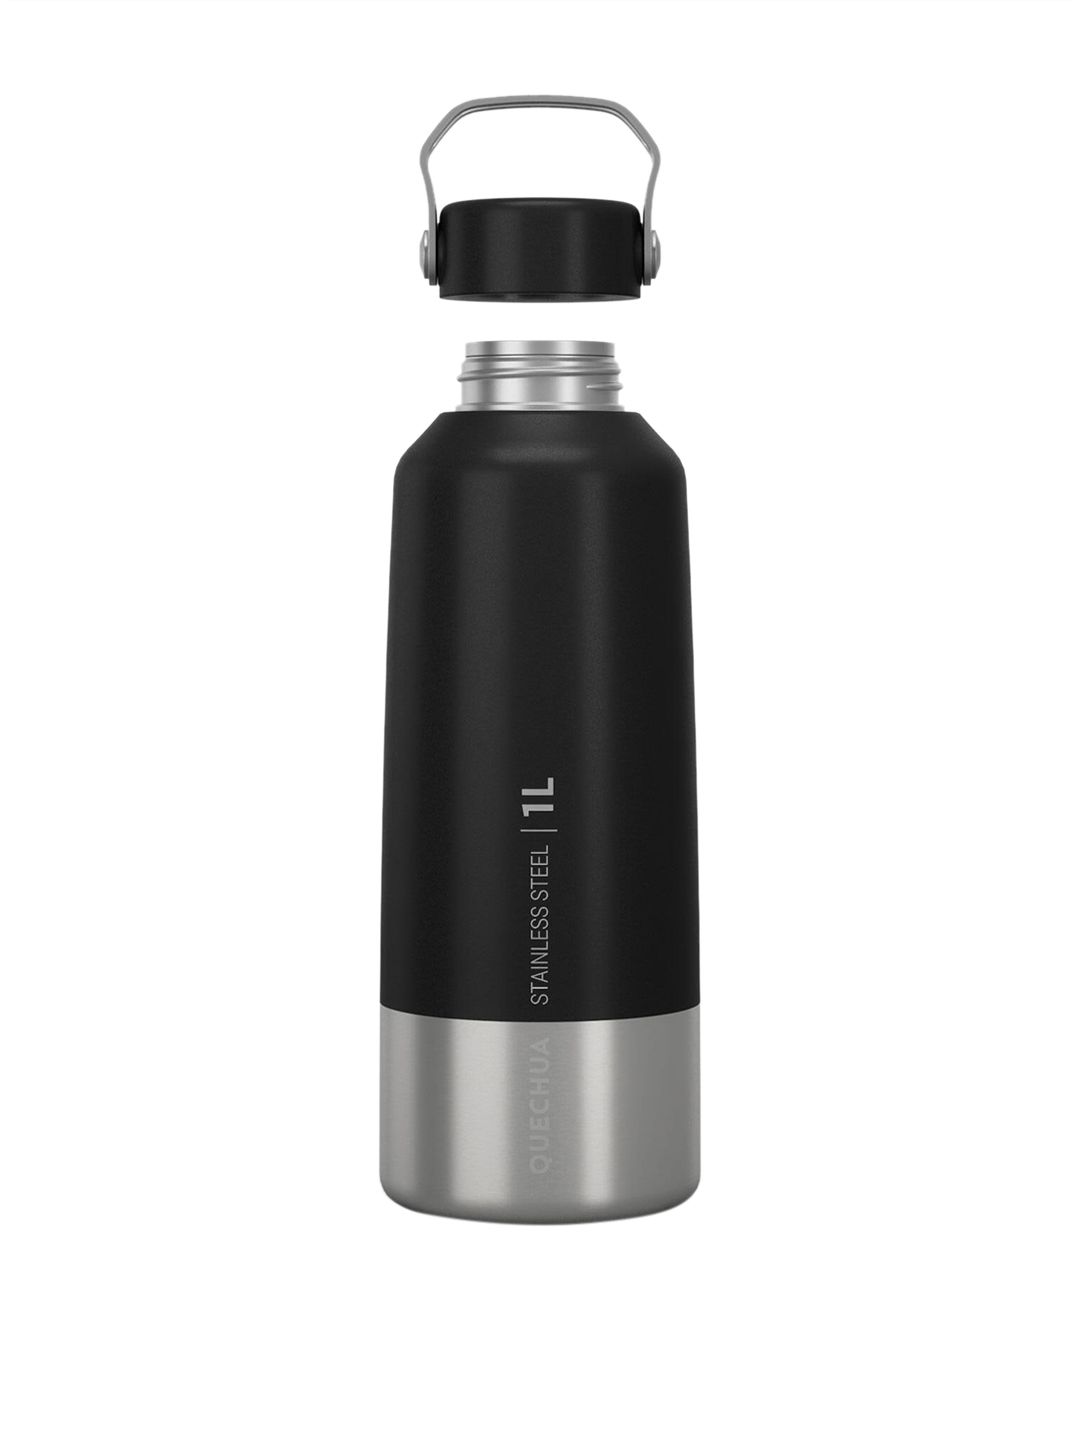 Quechua By Decathlon Black & Silver-Toned Colourblocked Stainless Steel Water Bottle Price in India